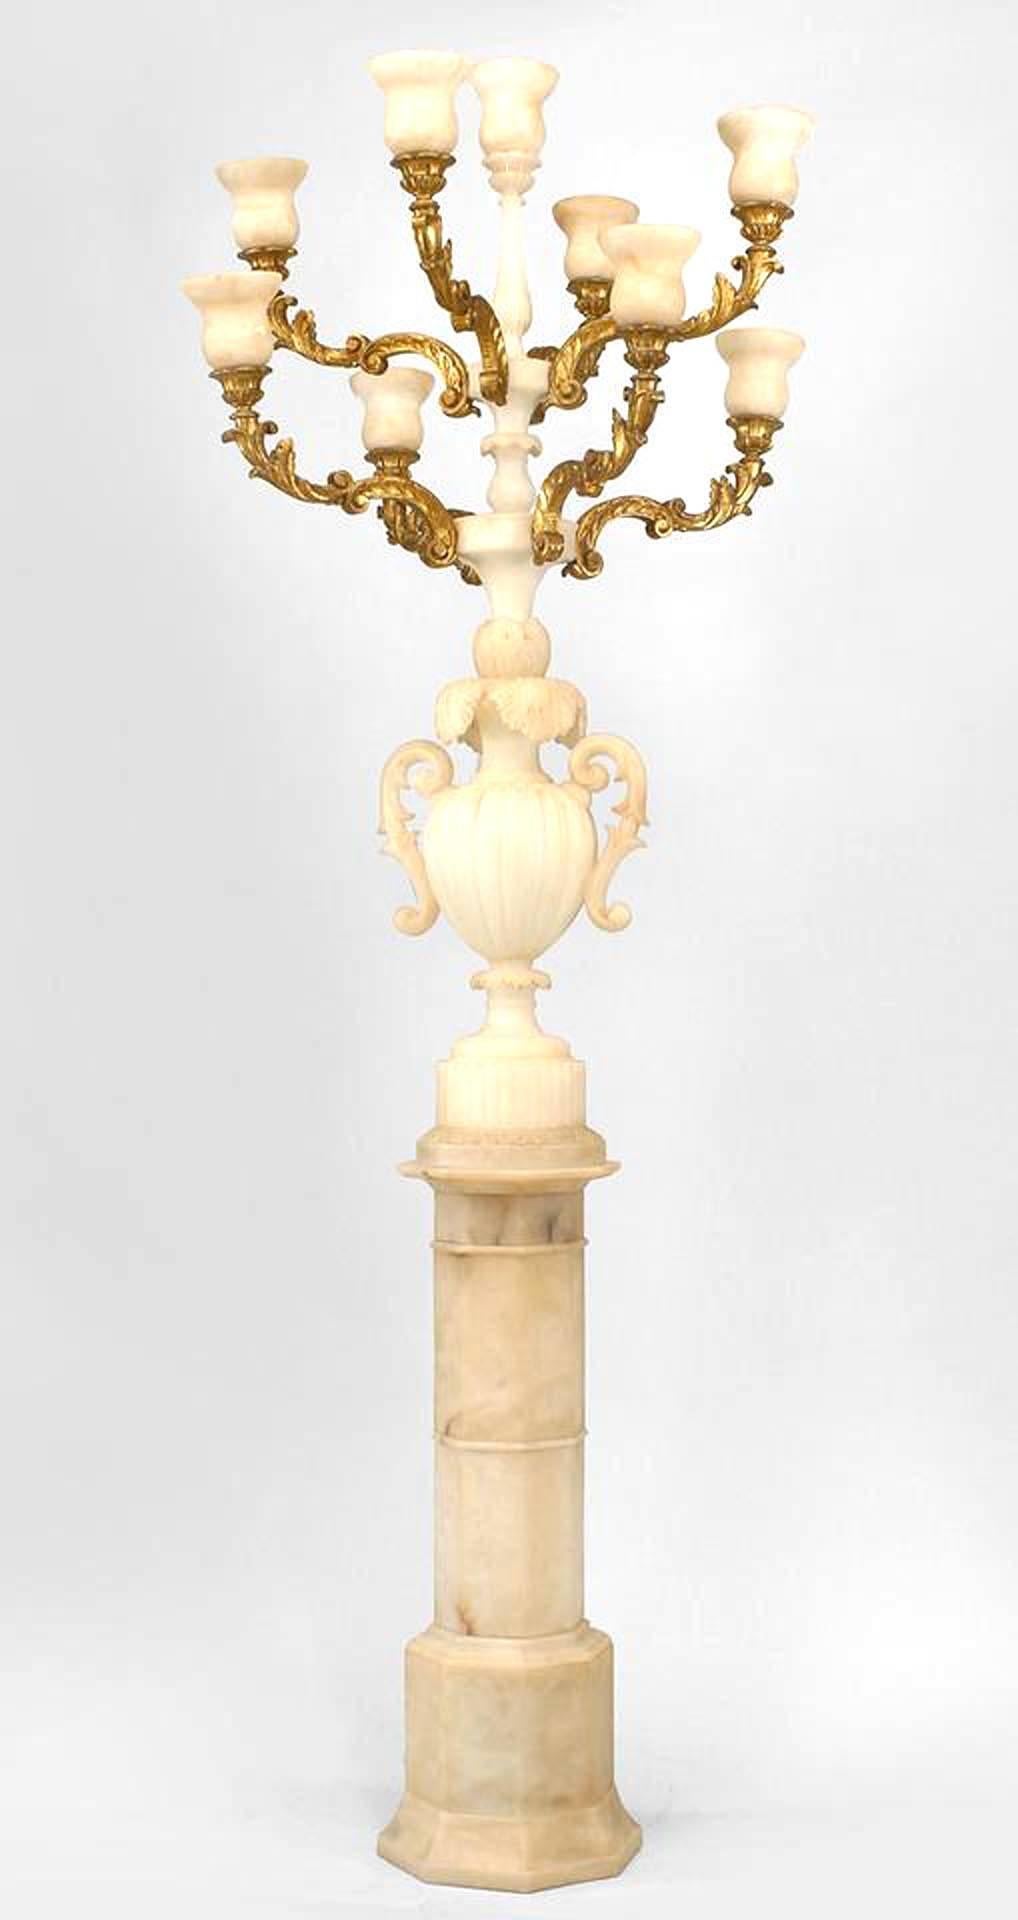 Pair of Italian Rococo style (dated 1932) white alabaster 9 light floor torchiere with a carved urn with handles supporting 8 gilt carved arms all mounted on a pedestal base (PRICED AS Pair).
